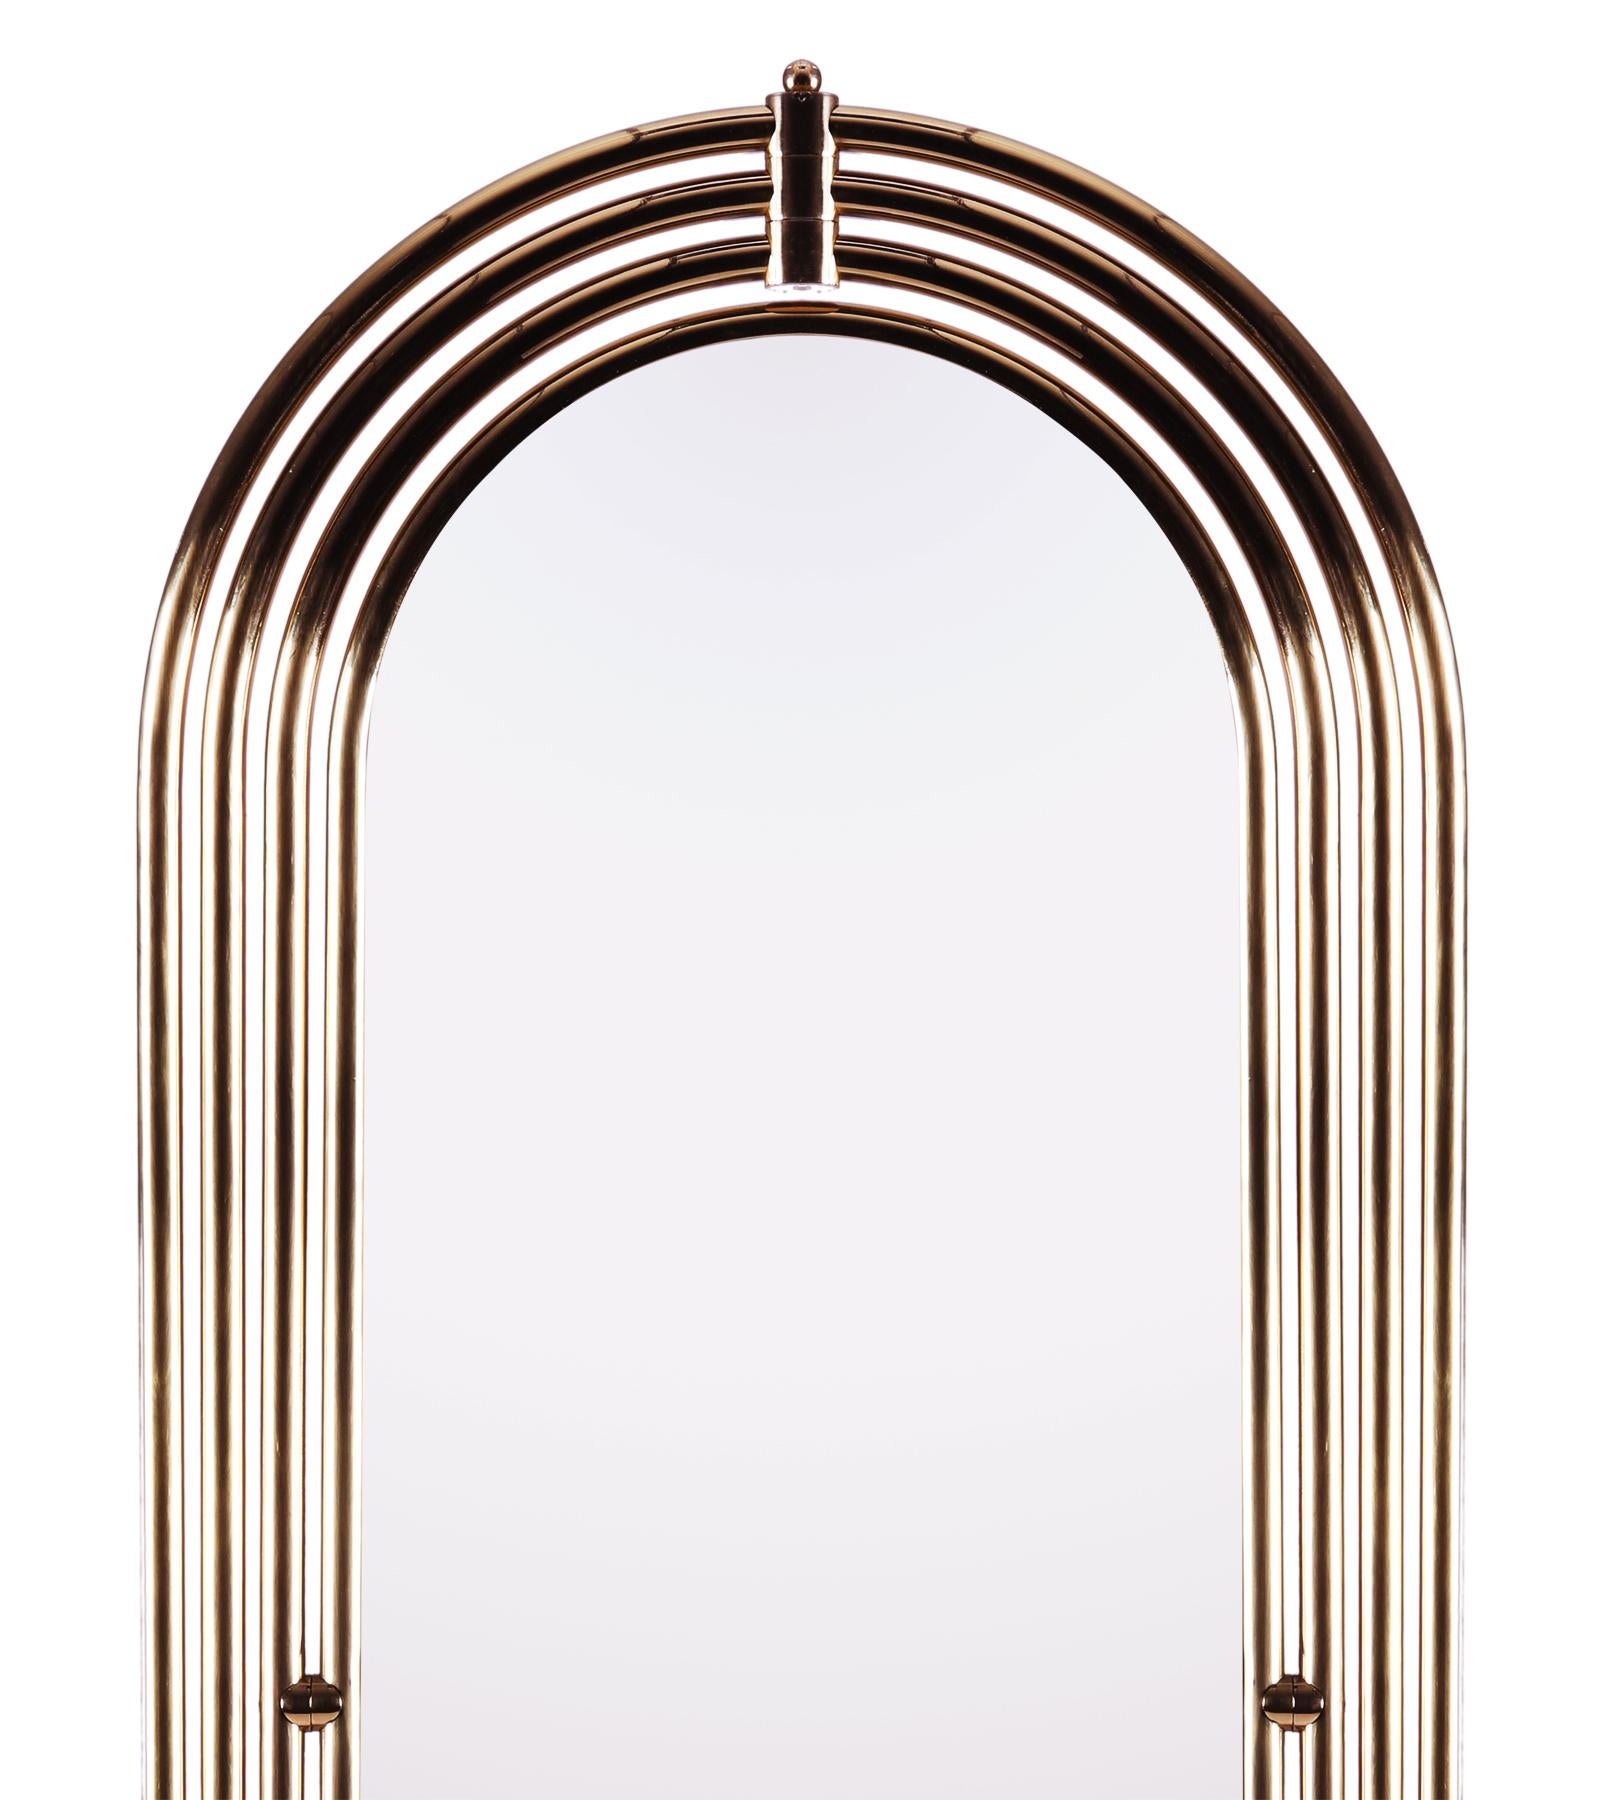 Floor mirror brass tubular with LED light with
polished brass tubular frame structure. Led
light system included in brass tubular frame.
Rotate mirror on 360 degrees axis on black
marble round base with brass trim around.
With beveled mirror